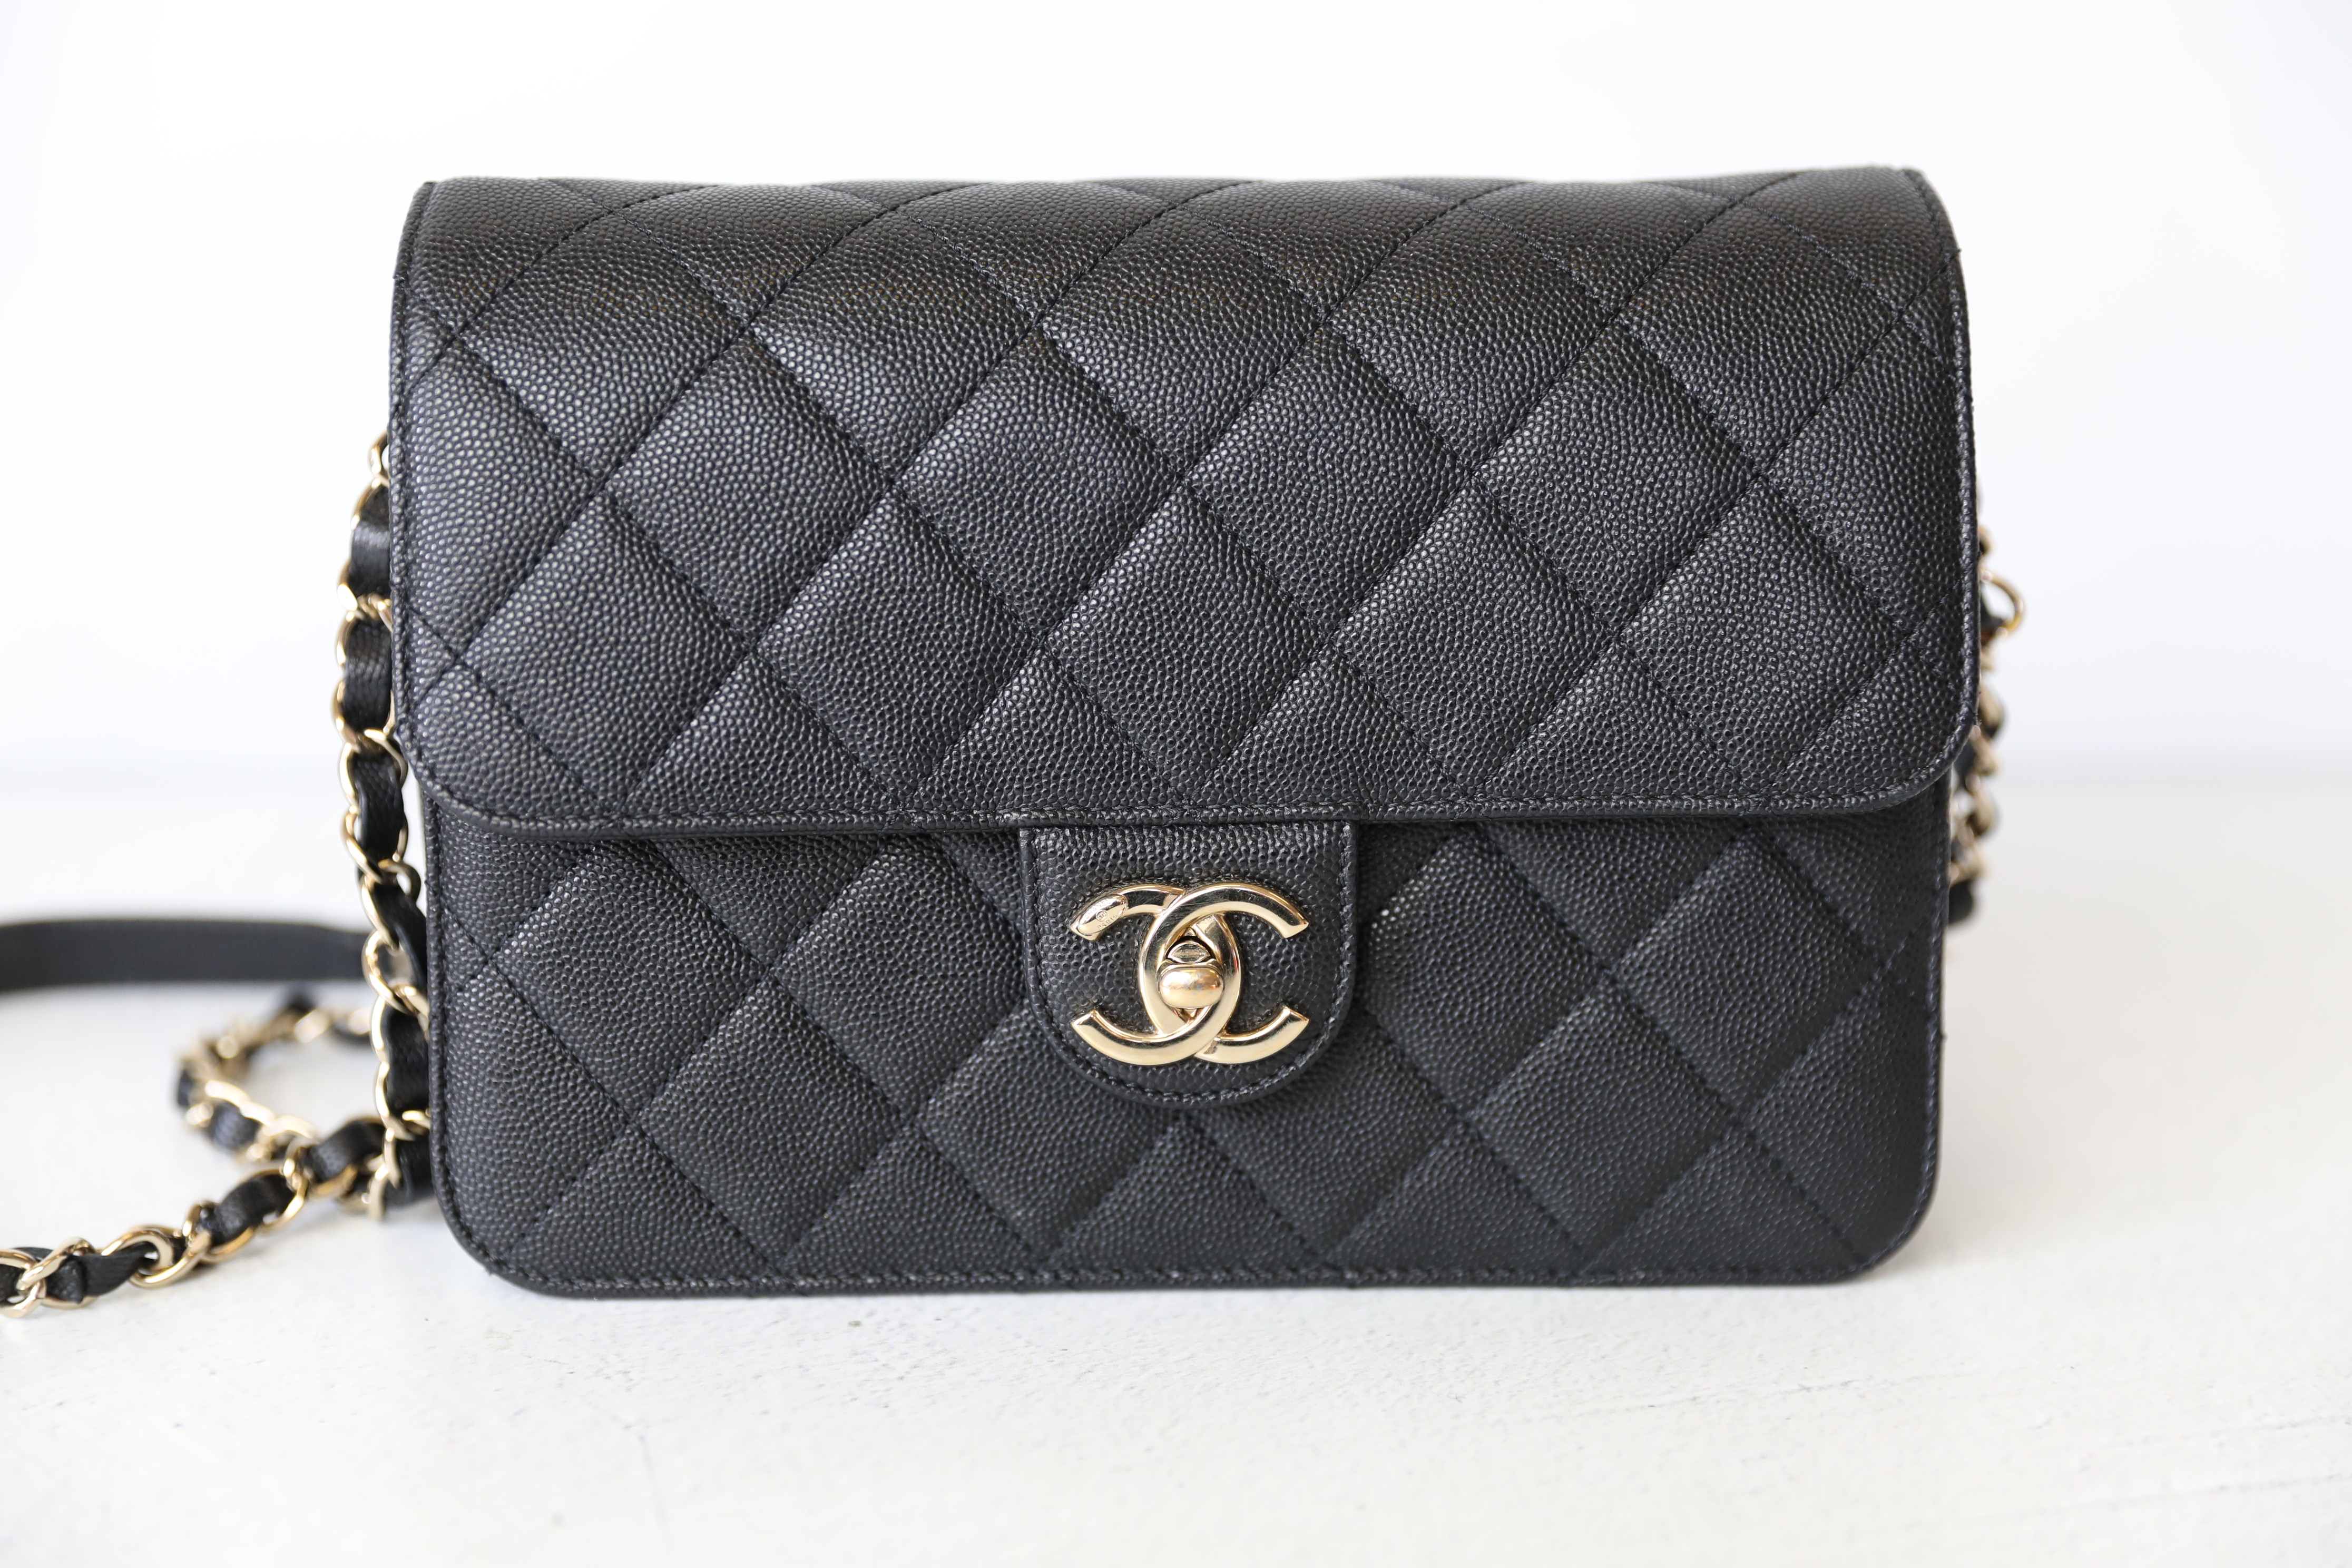 Chanel Towel Bag Black with Pouch and Towel, New MA001 - Julia Rose Boston